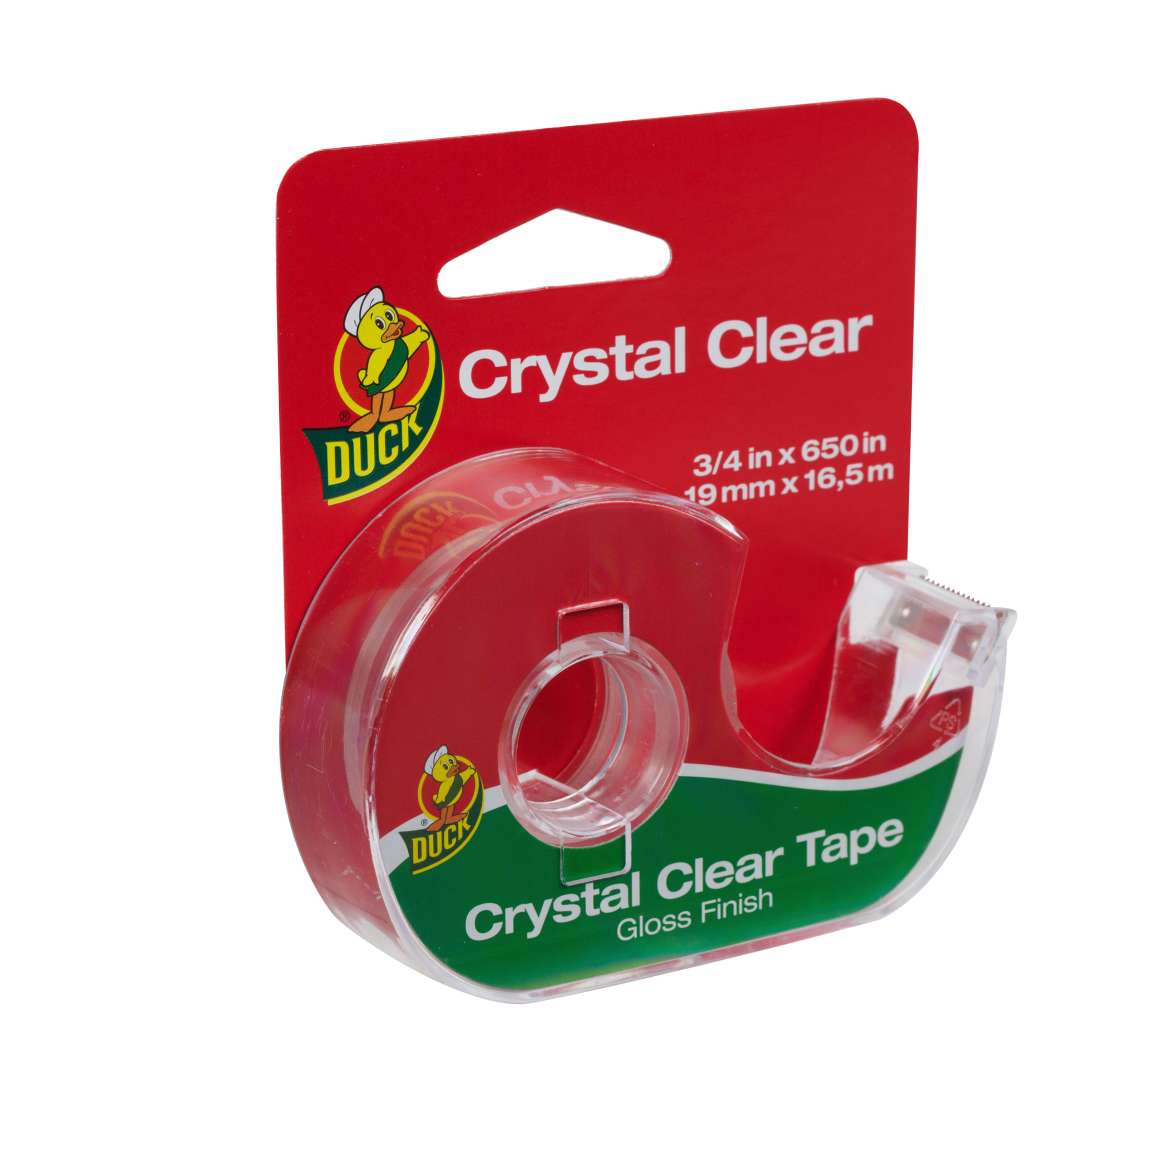 Crystal Clear Invisible Tape